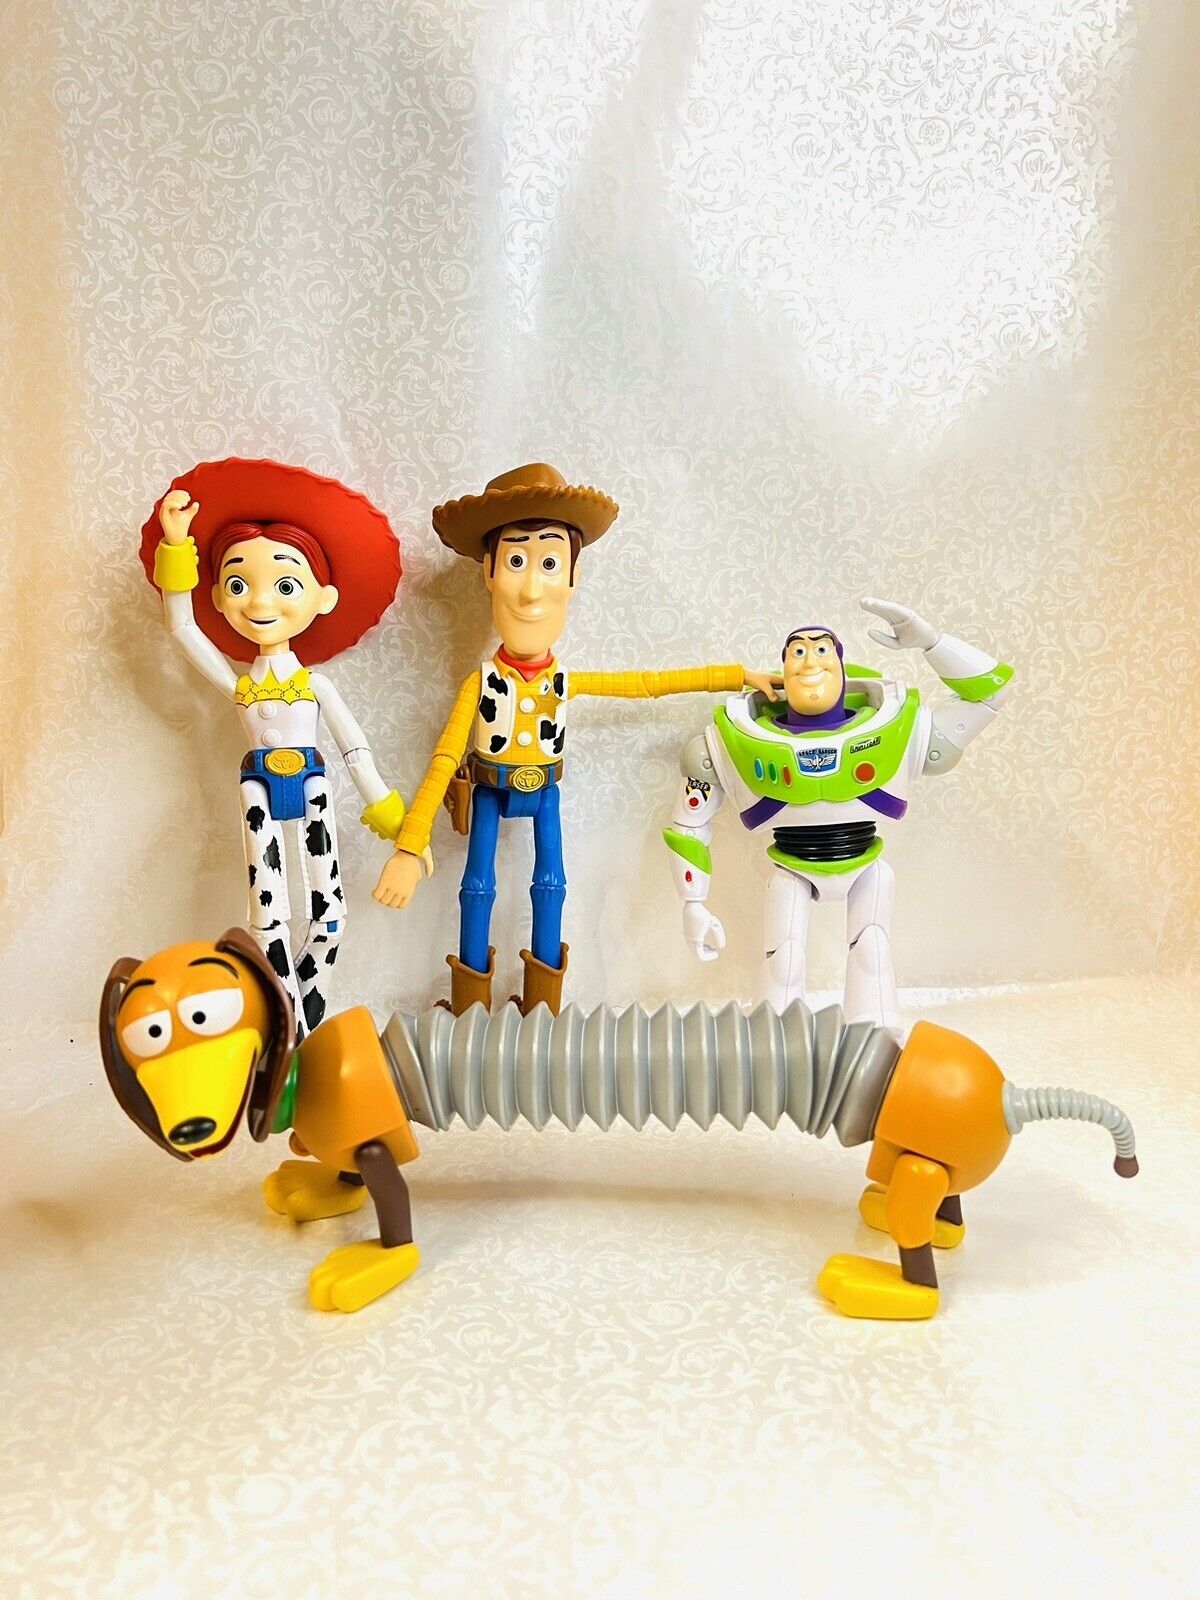 Best Offer ￼Toy Story Action FIgure Lot of 3 - Woody Buzz Lightyear Jessie